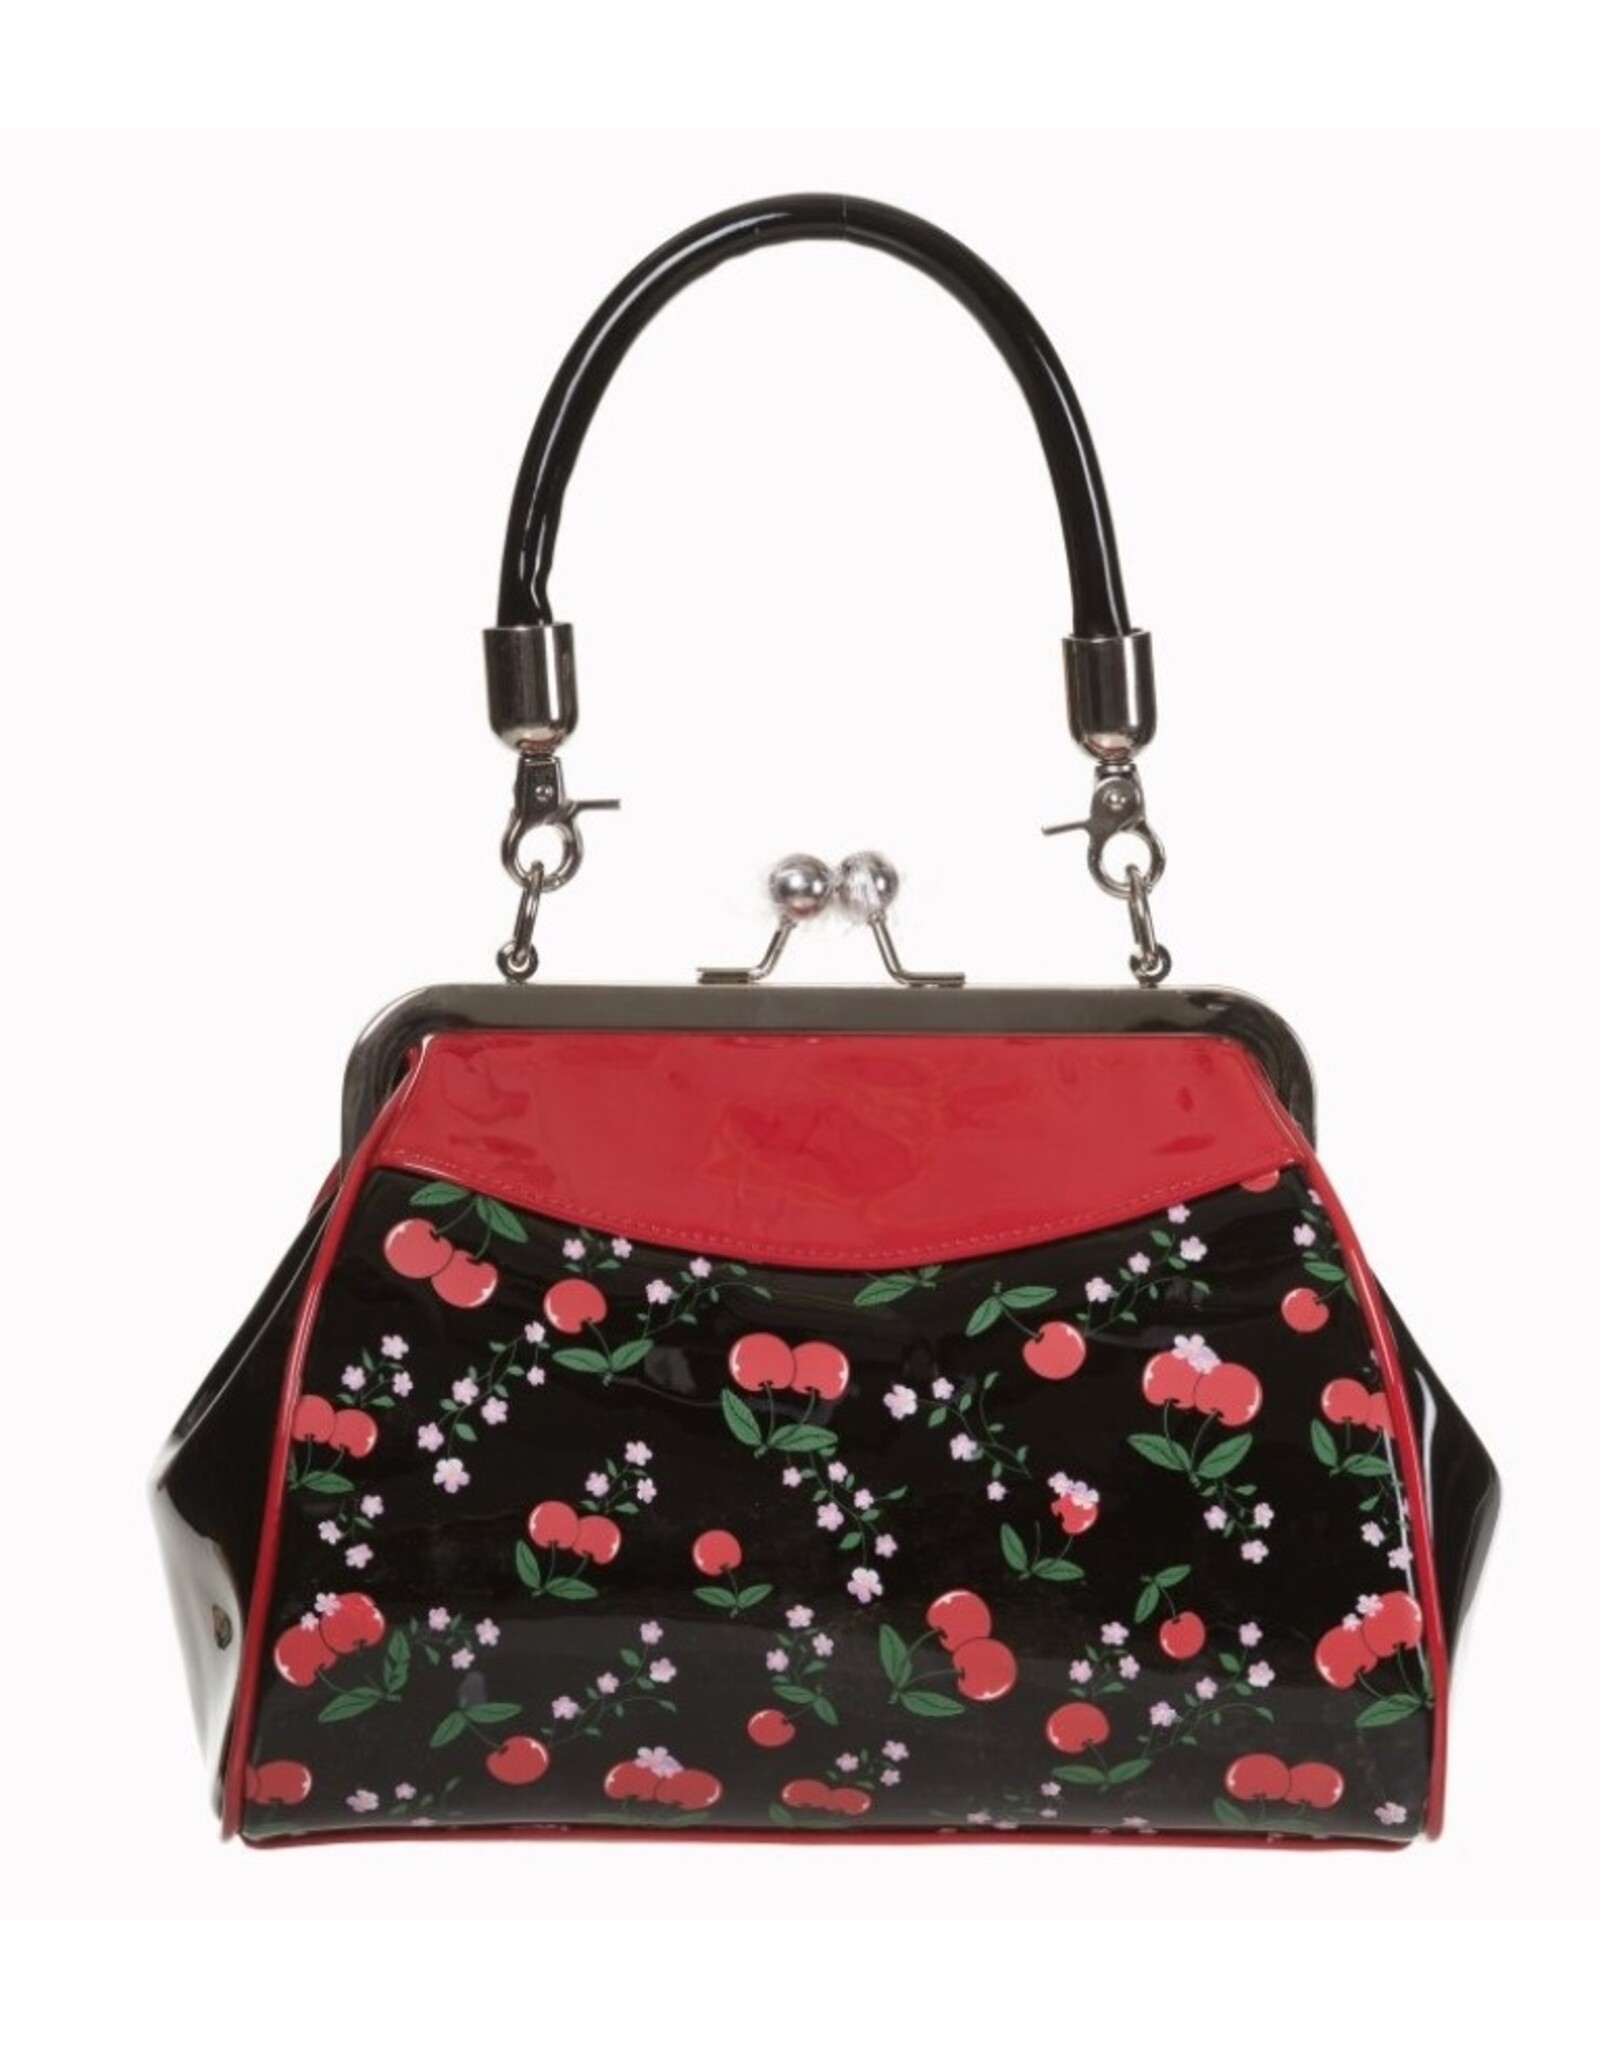 Banned Retro bags  Vintage bags - Banned New Romantics Handbag  with Cherries